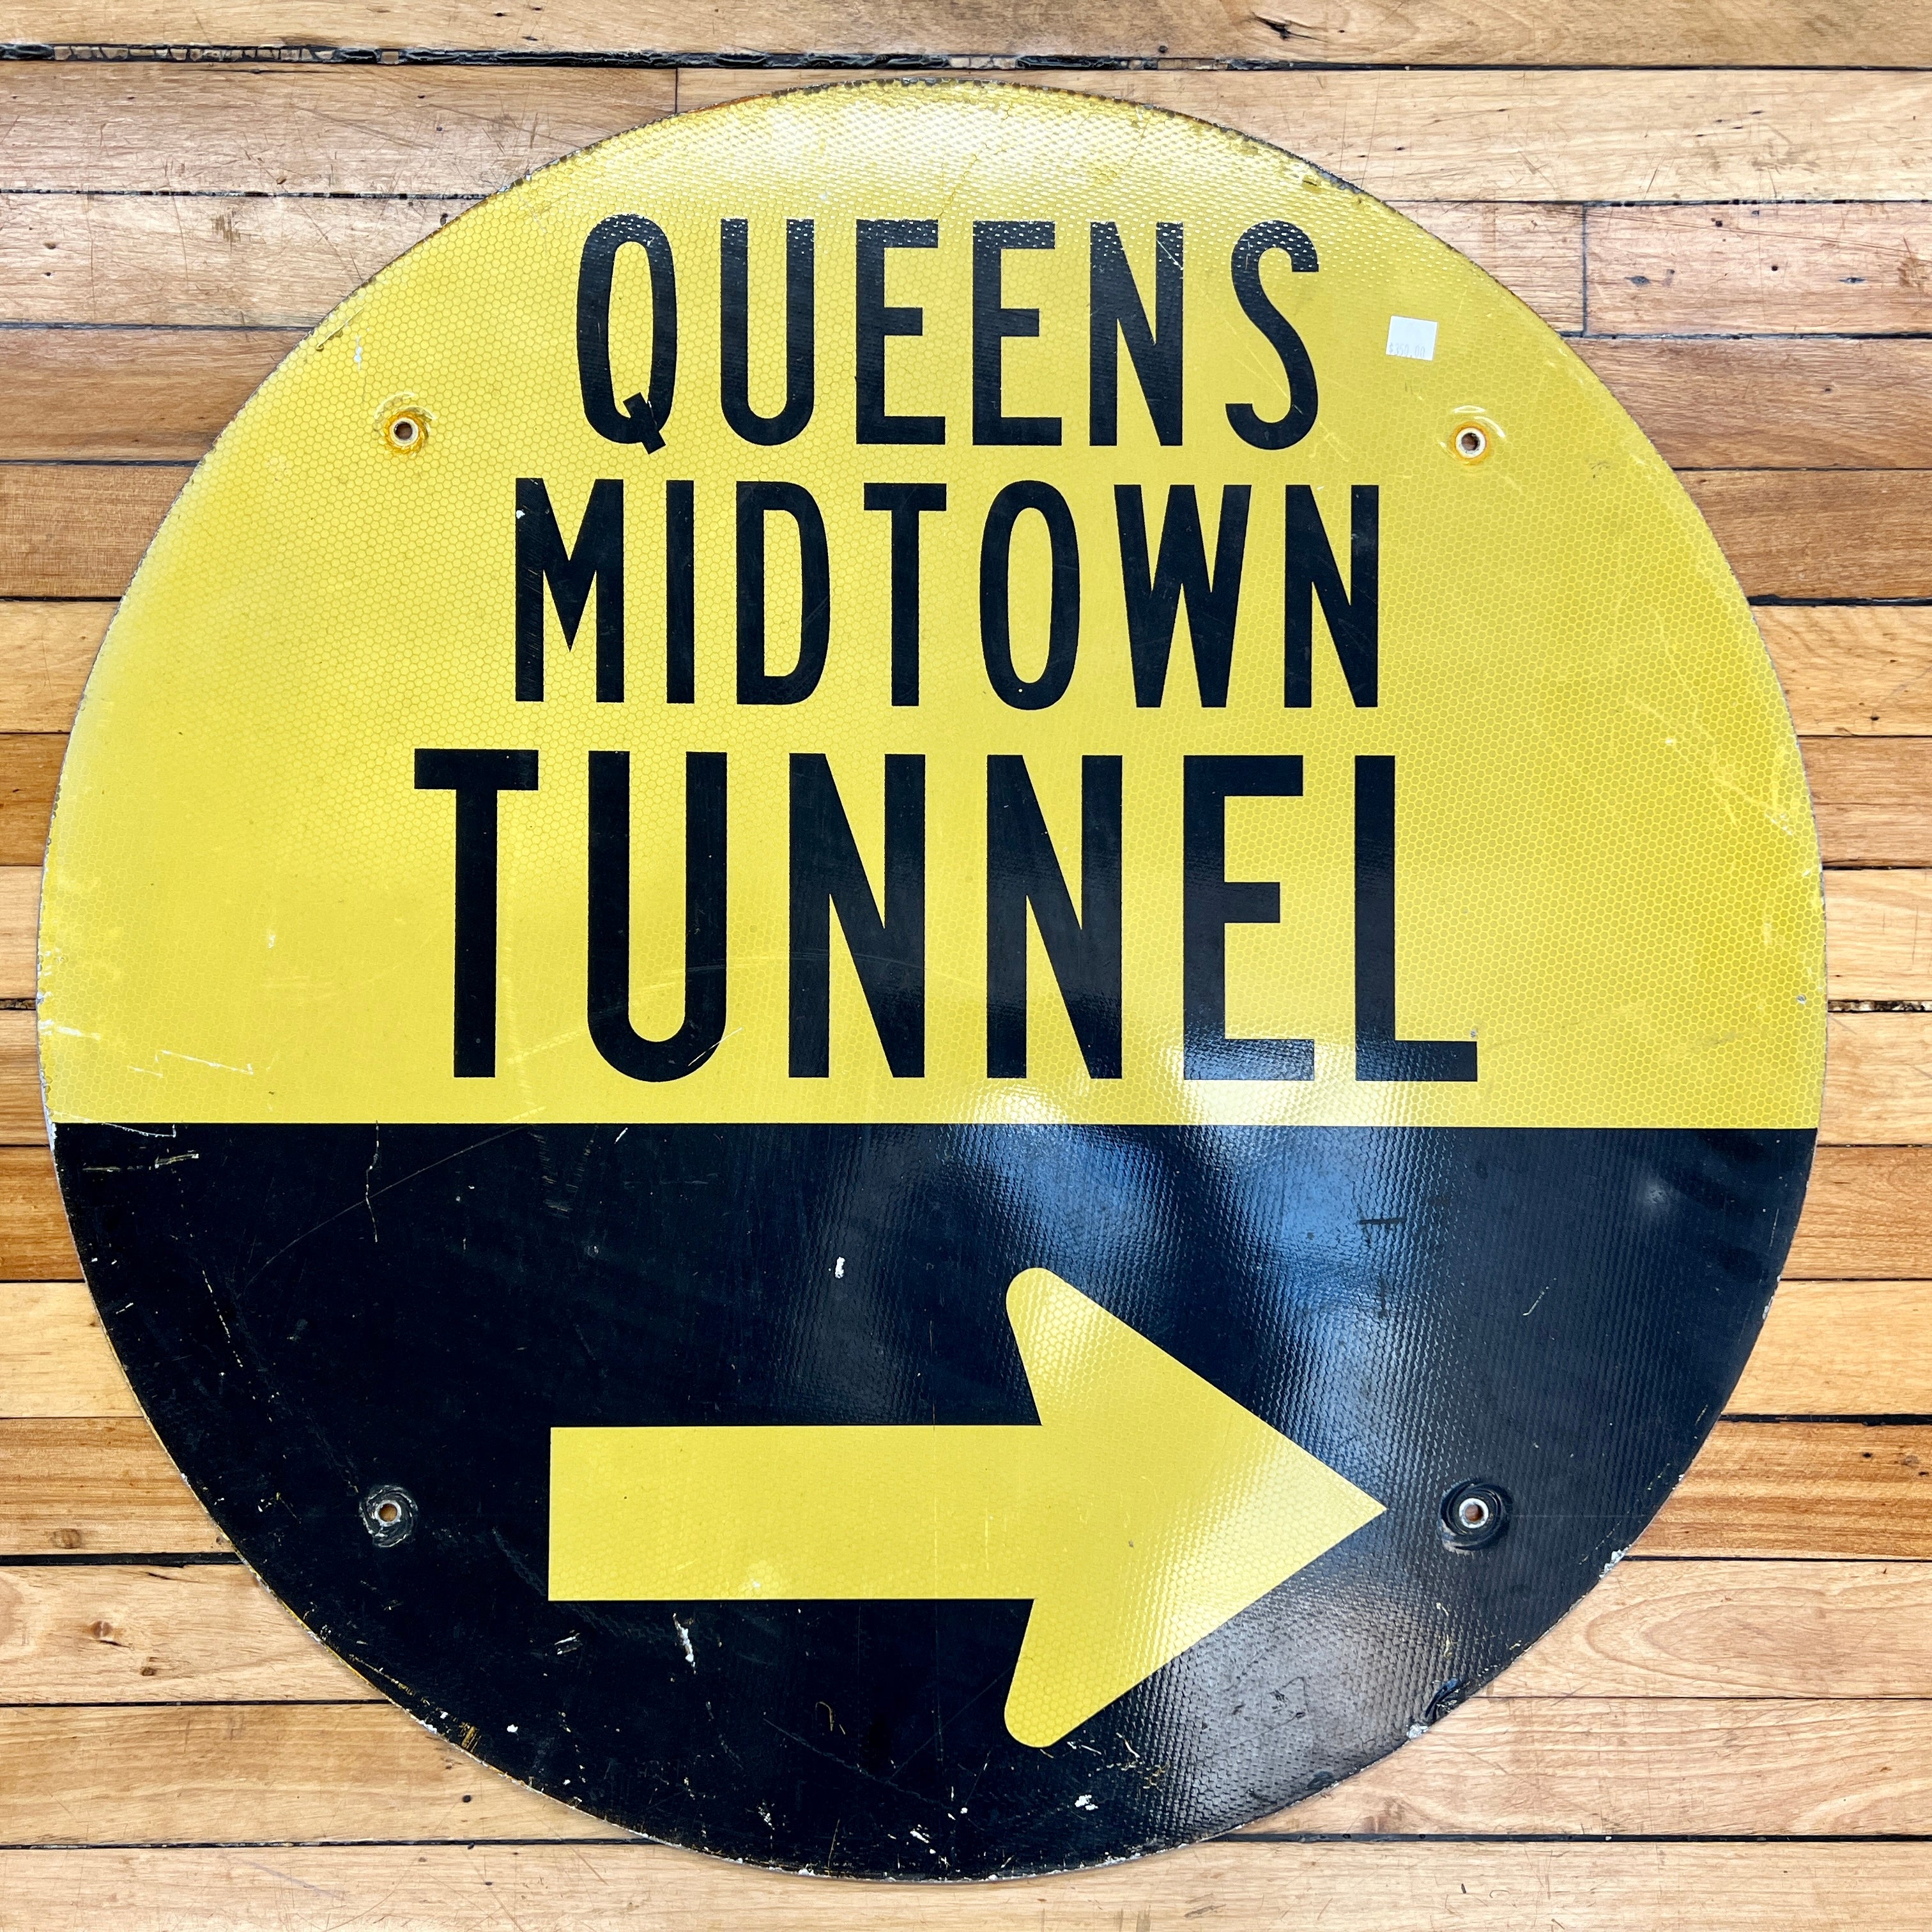 Queens Midtown Tunnel, New York, NY Sign (Ver. 3)